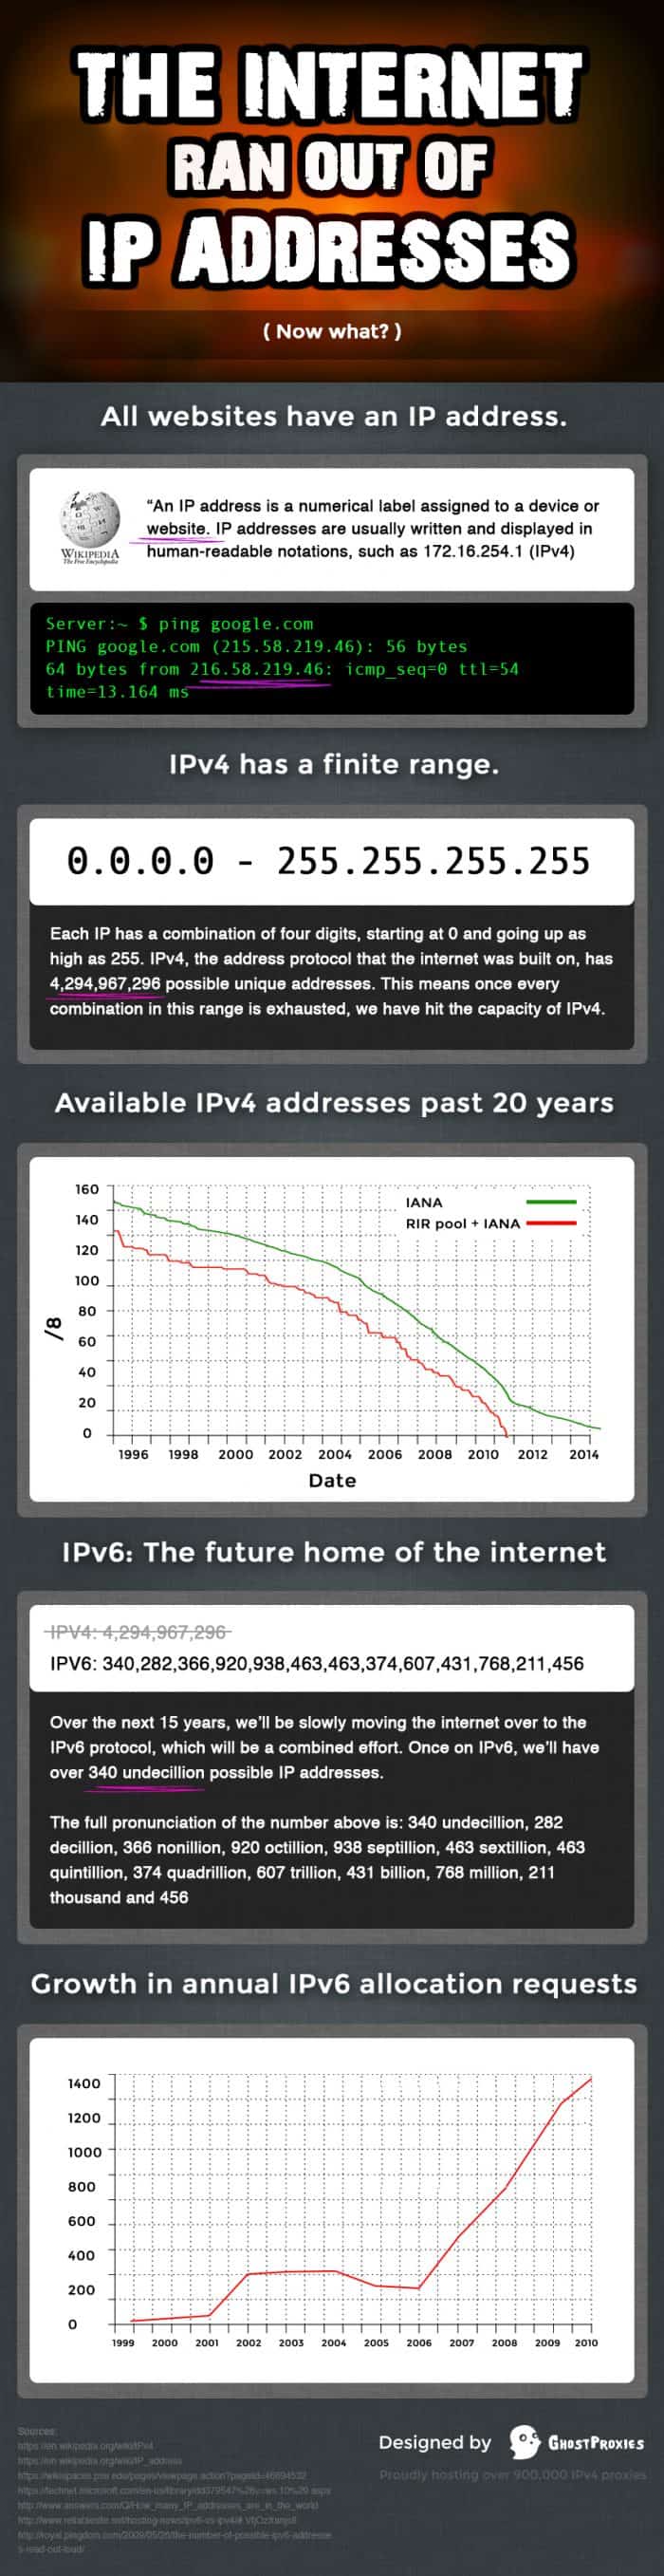 Ip address ran out infographic